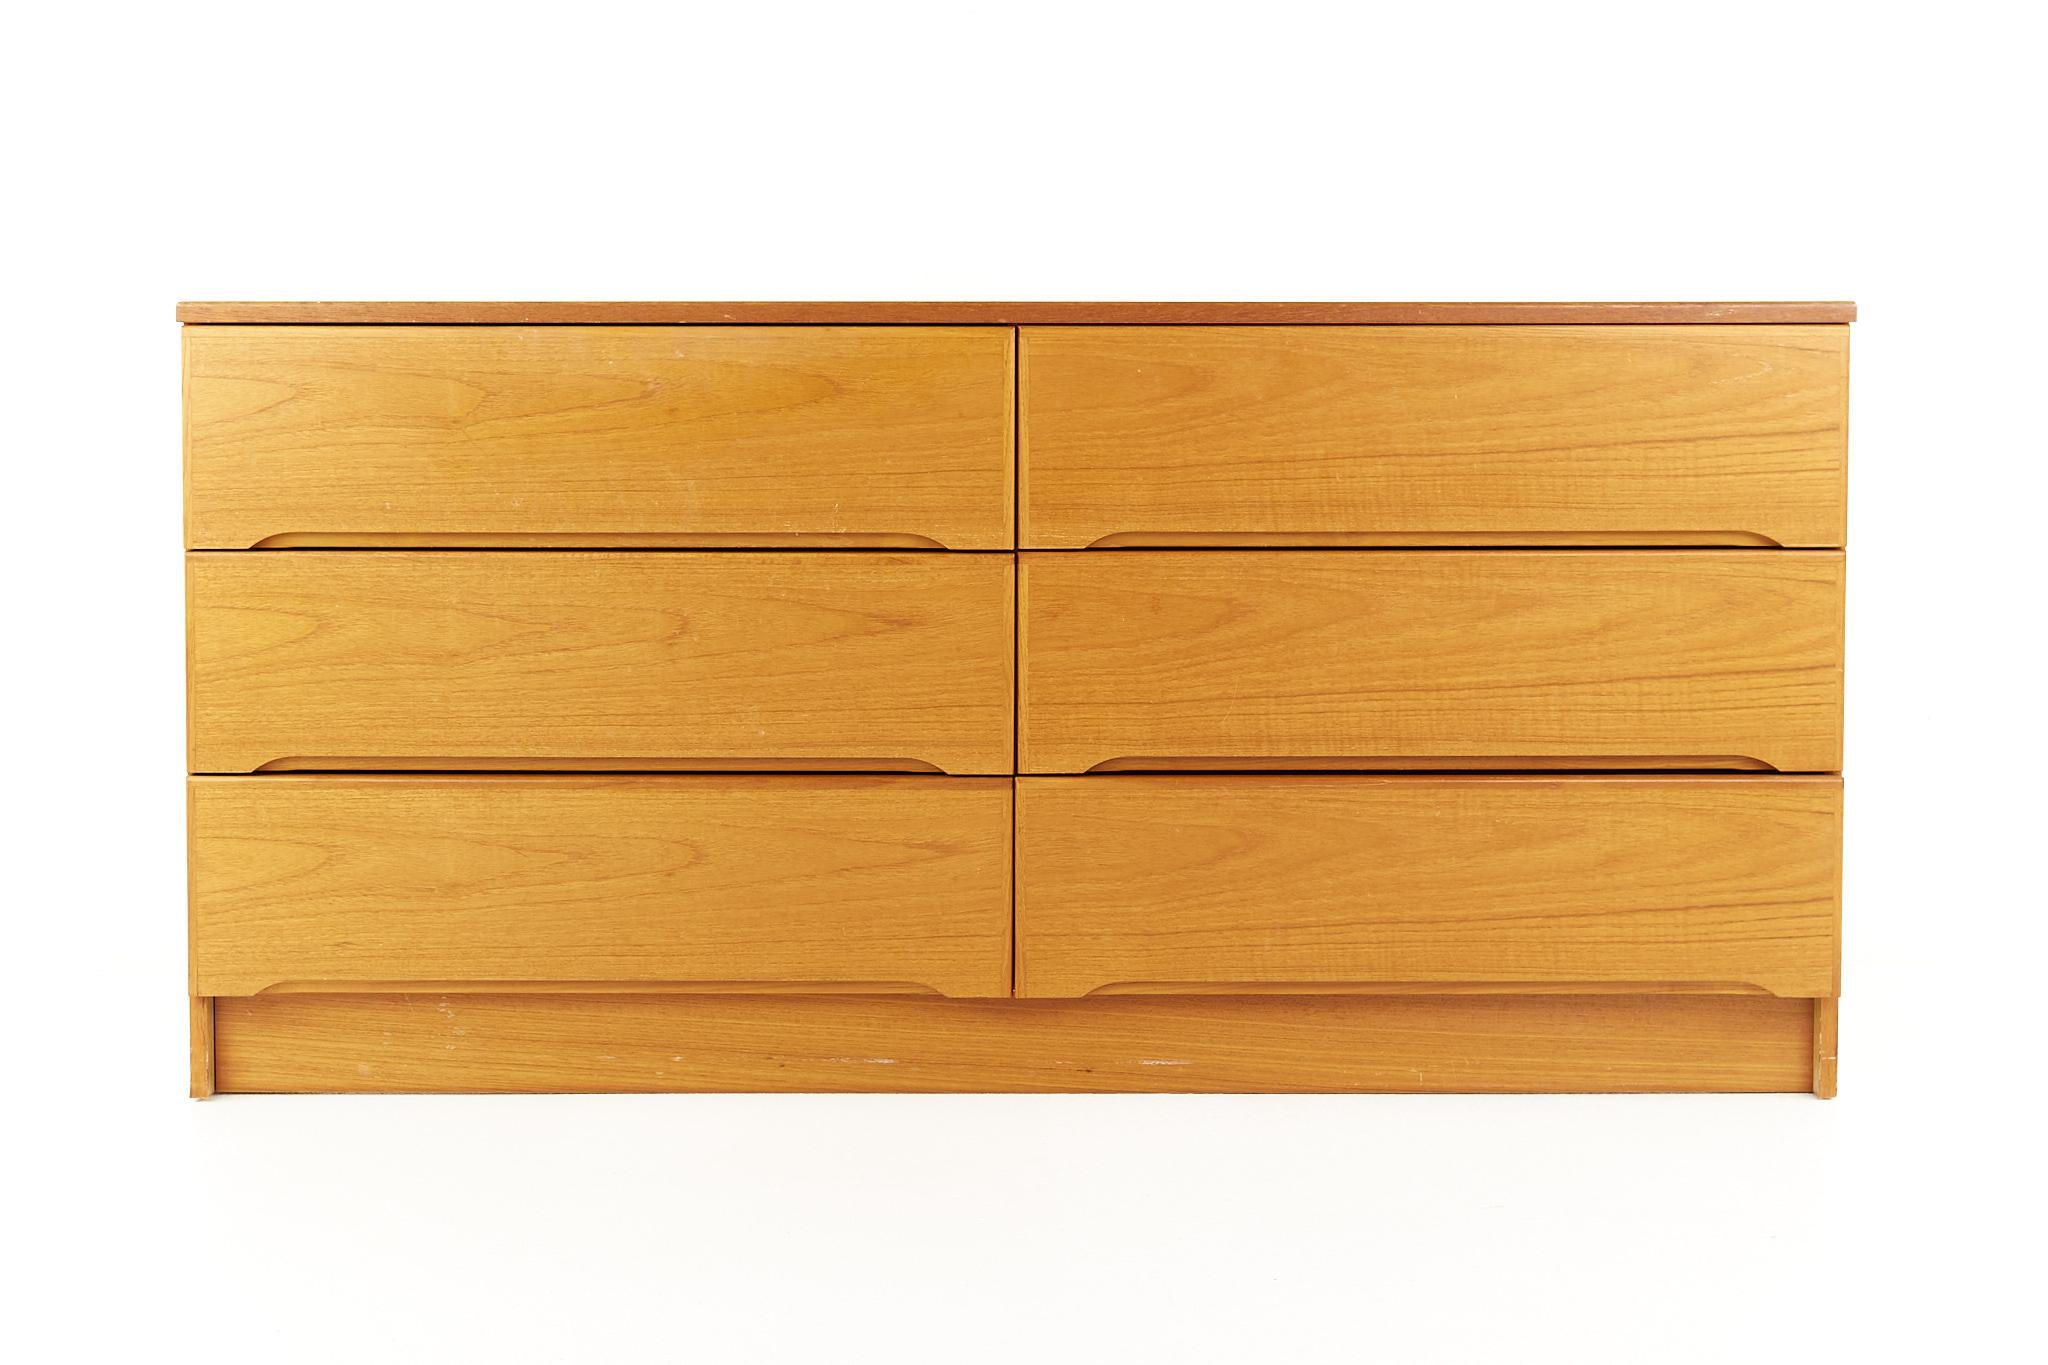 Westnofa style mid century teak 6 drawer lowboy dresser

This dresser measures: 60 wide x 18 deep x 29 inches high

All pieces of furniture can be had in what we call restored vintage condition. That means the piece is restored upon purchase so